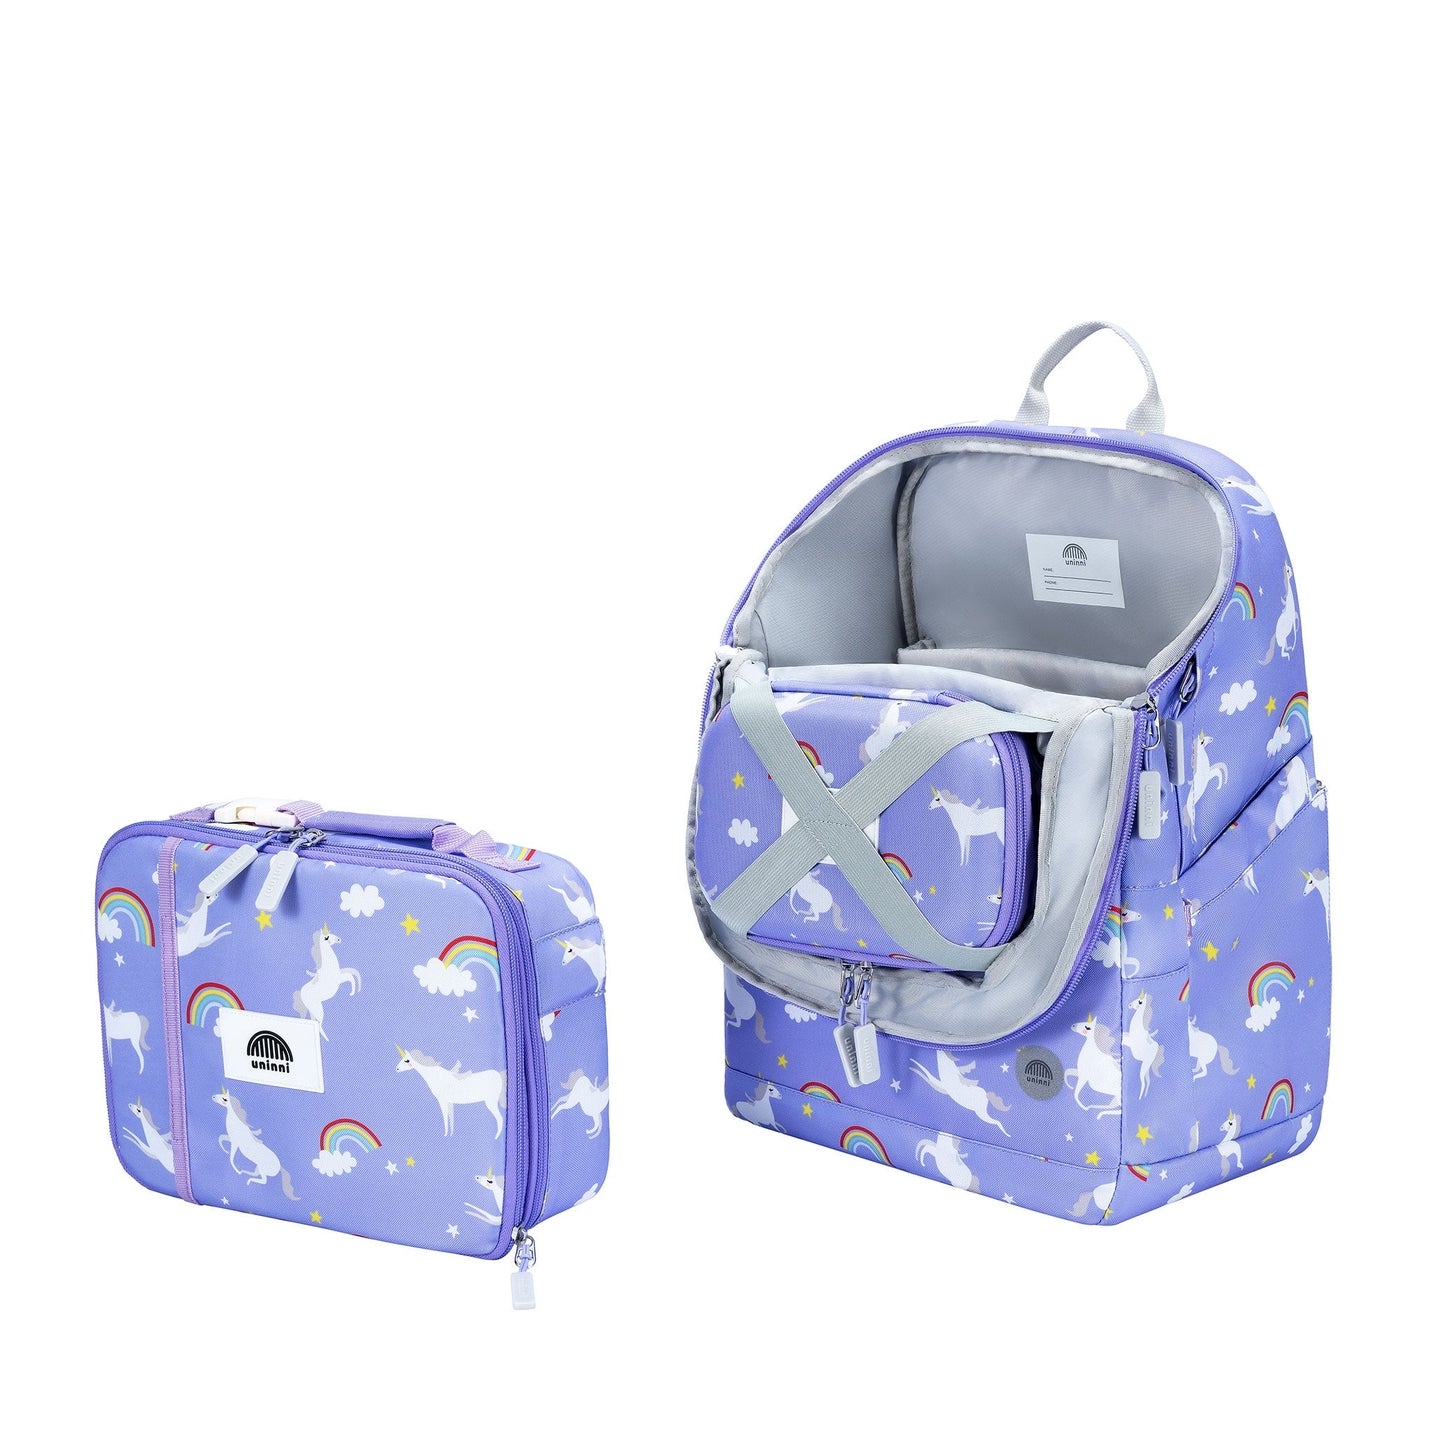 Matching Backpack, Lunch Tote, & Pencil Case by Uninni - Unicorn